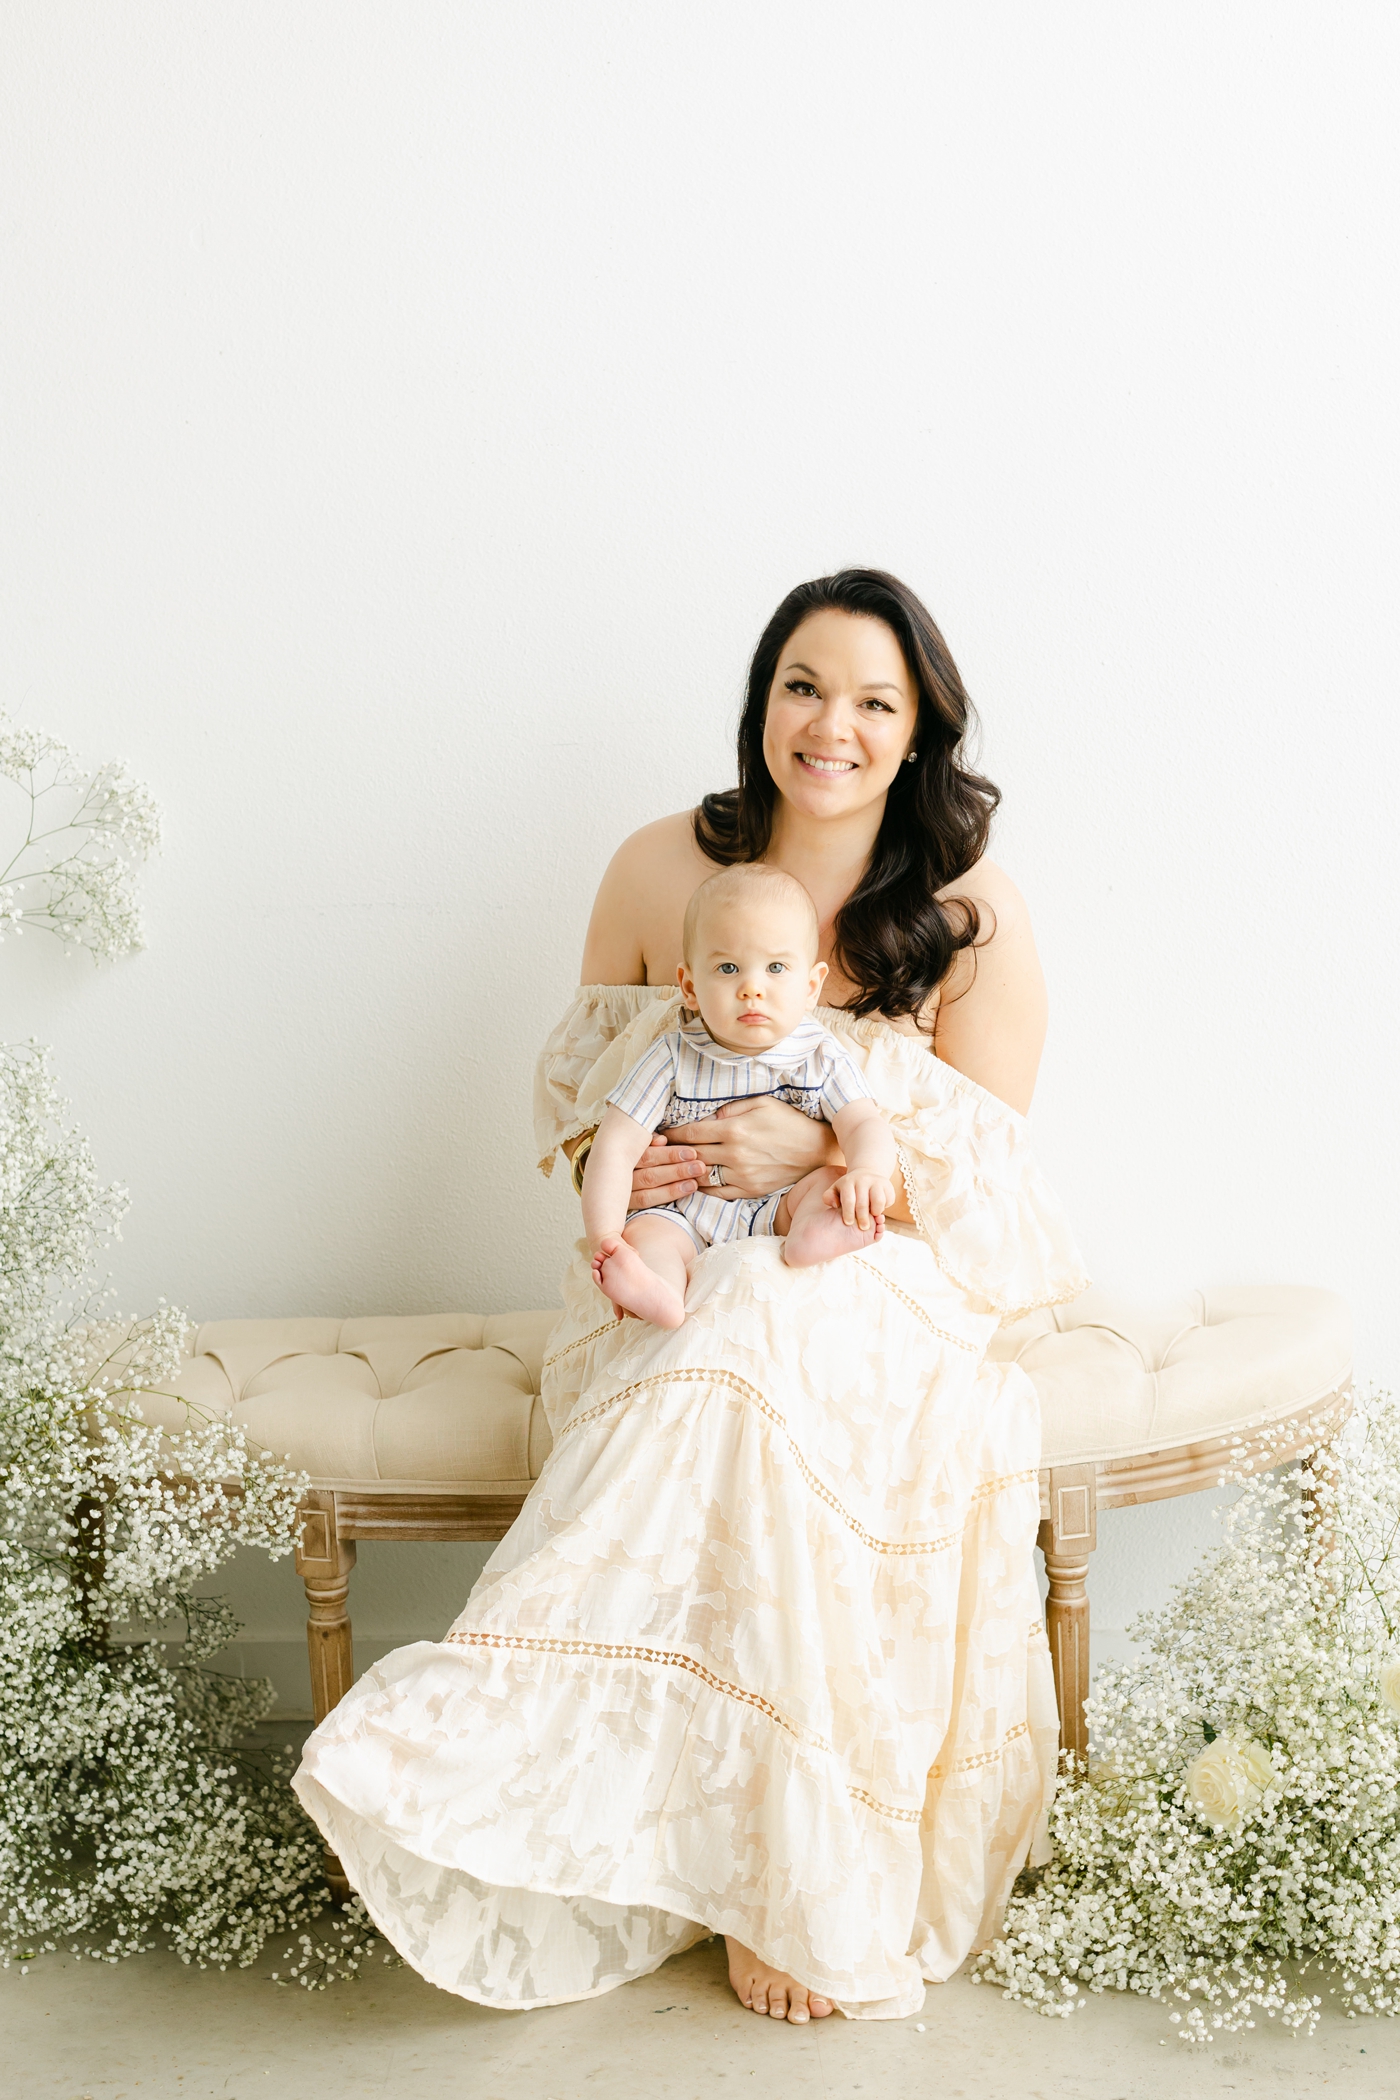 Mom in off-white maxi dress sitting on bench with baby. Photo by Sana Ahmed Photography.